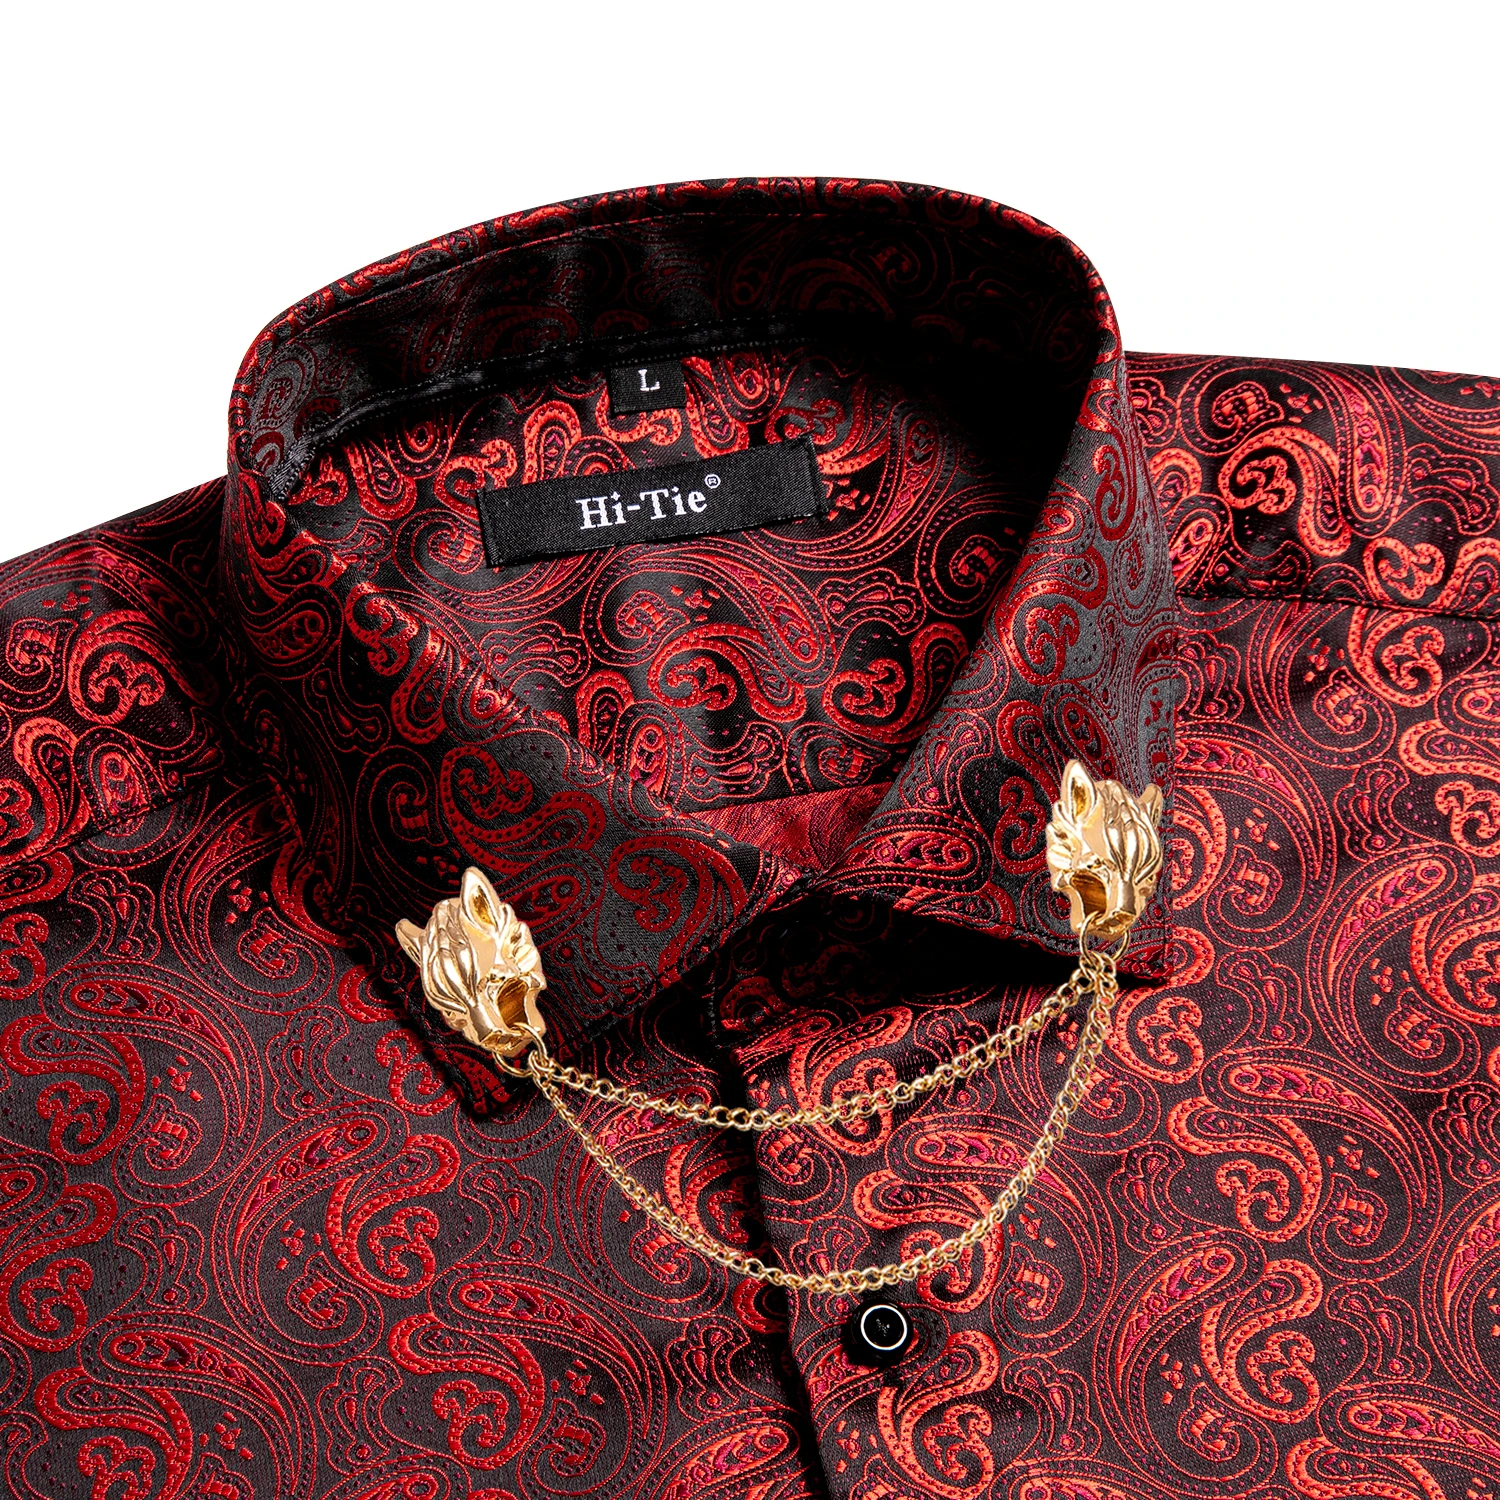 Hi-Tie Red Silk Mens Shirts Classic Paisley Lapel Long Sleeve Slim Fit High Quality Spring Autumn Shirt Male Business Party Gift barry wang jacquard silk mens scarf floral paisley stylish burgundy gold green red blue purple for male wedding business party